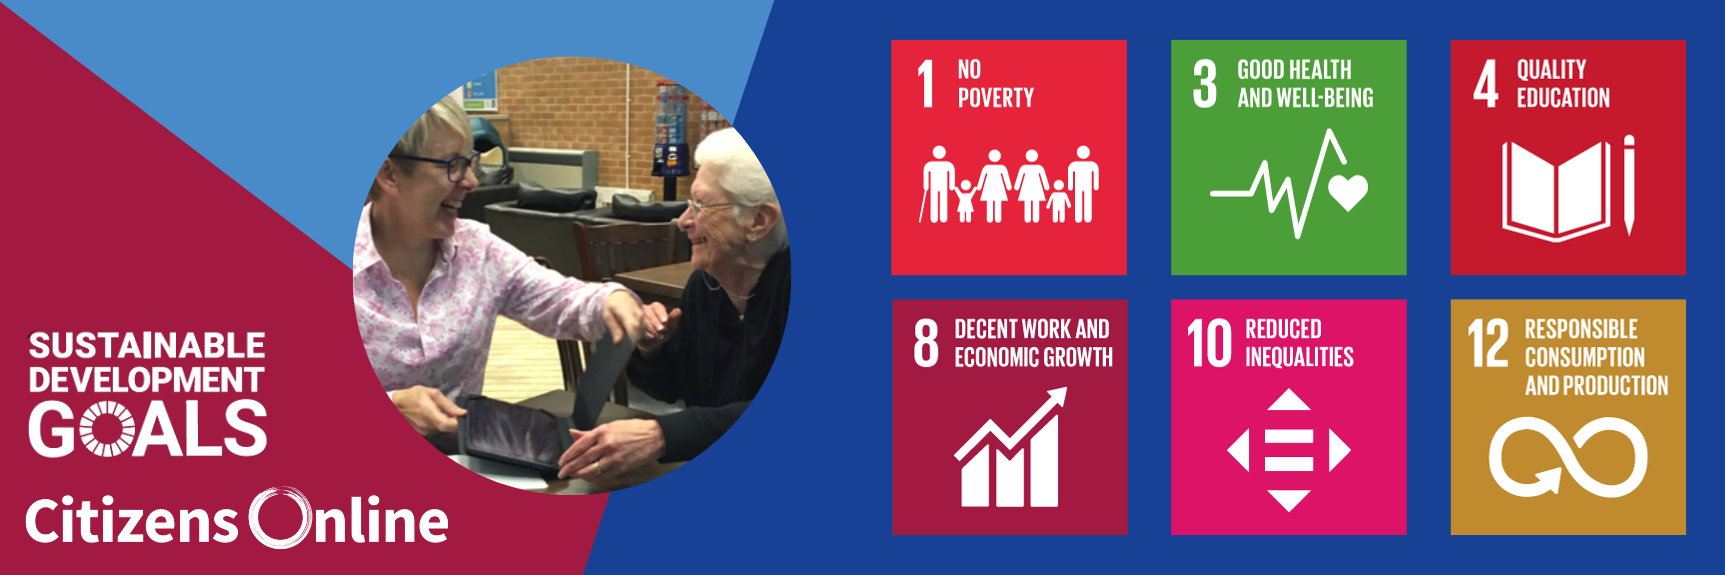 Image from Citizens Online with 6 United Nations Development Goals: Number 3 'Good Health and Well-being', 'Number 4 'Quality Education', Number 8 'Decent Work and Economic Growth', Number 10 'Reduced Inequalities', Number 12 'Responsible consumption and Production', with a photo of a learner being supported by a Digital Champion.